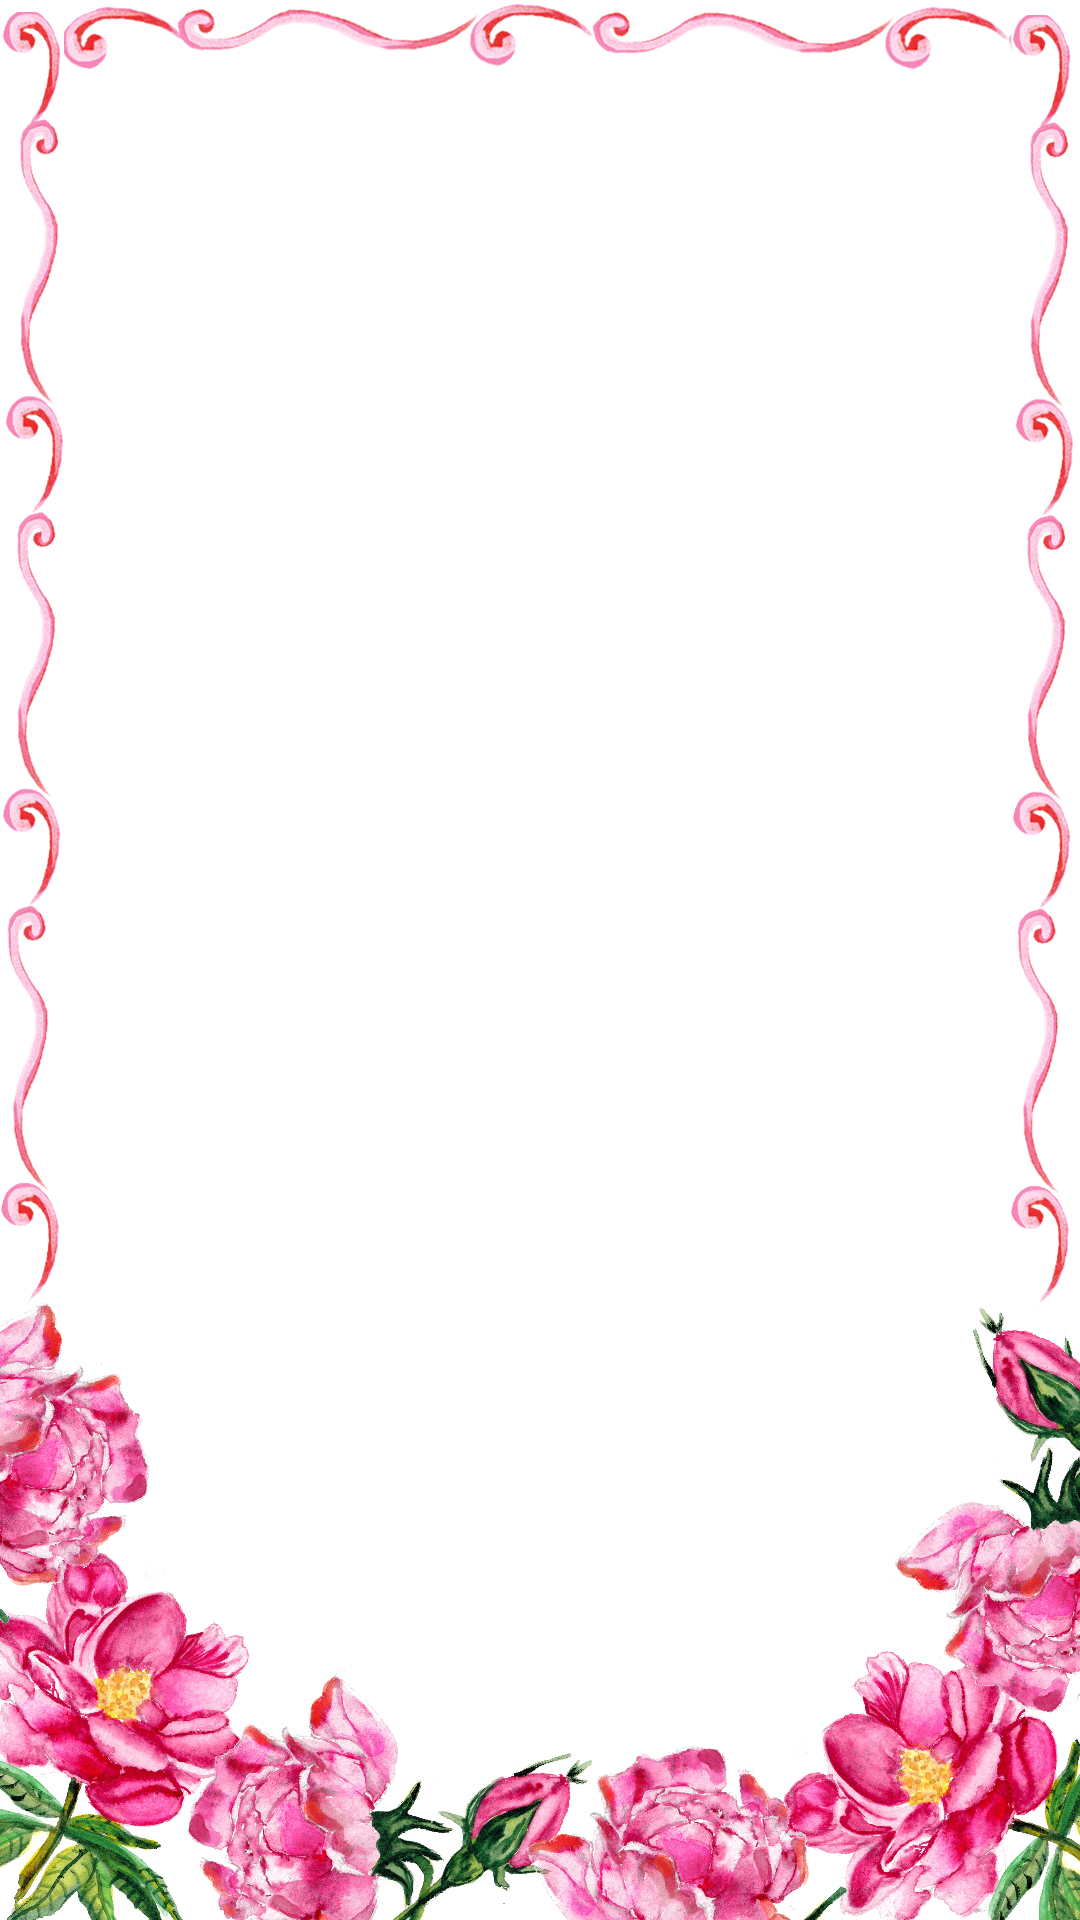 Pink Fl Border Png Transpa Image - Flowers At The Bottom (1080x1920)